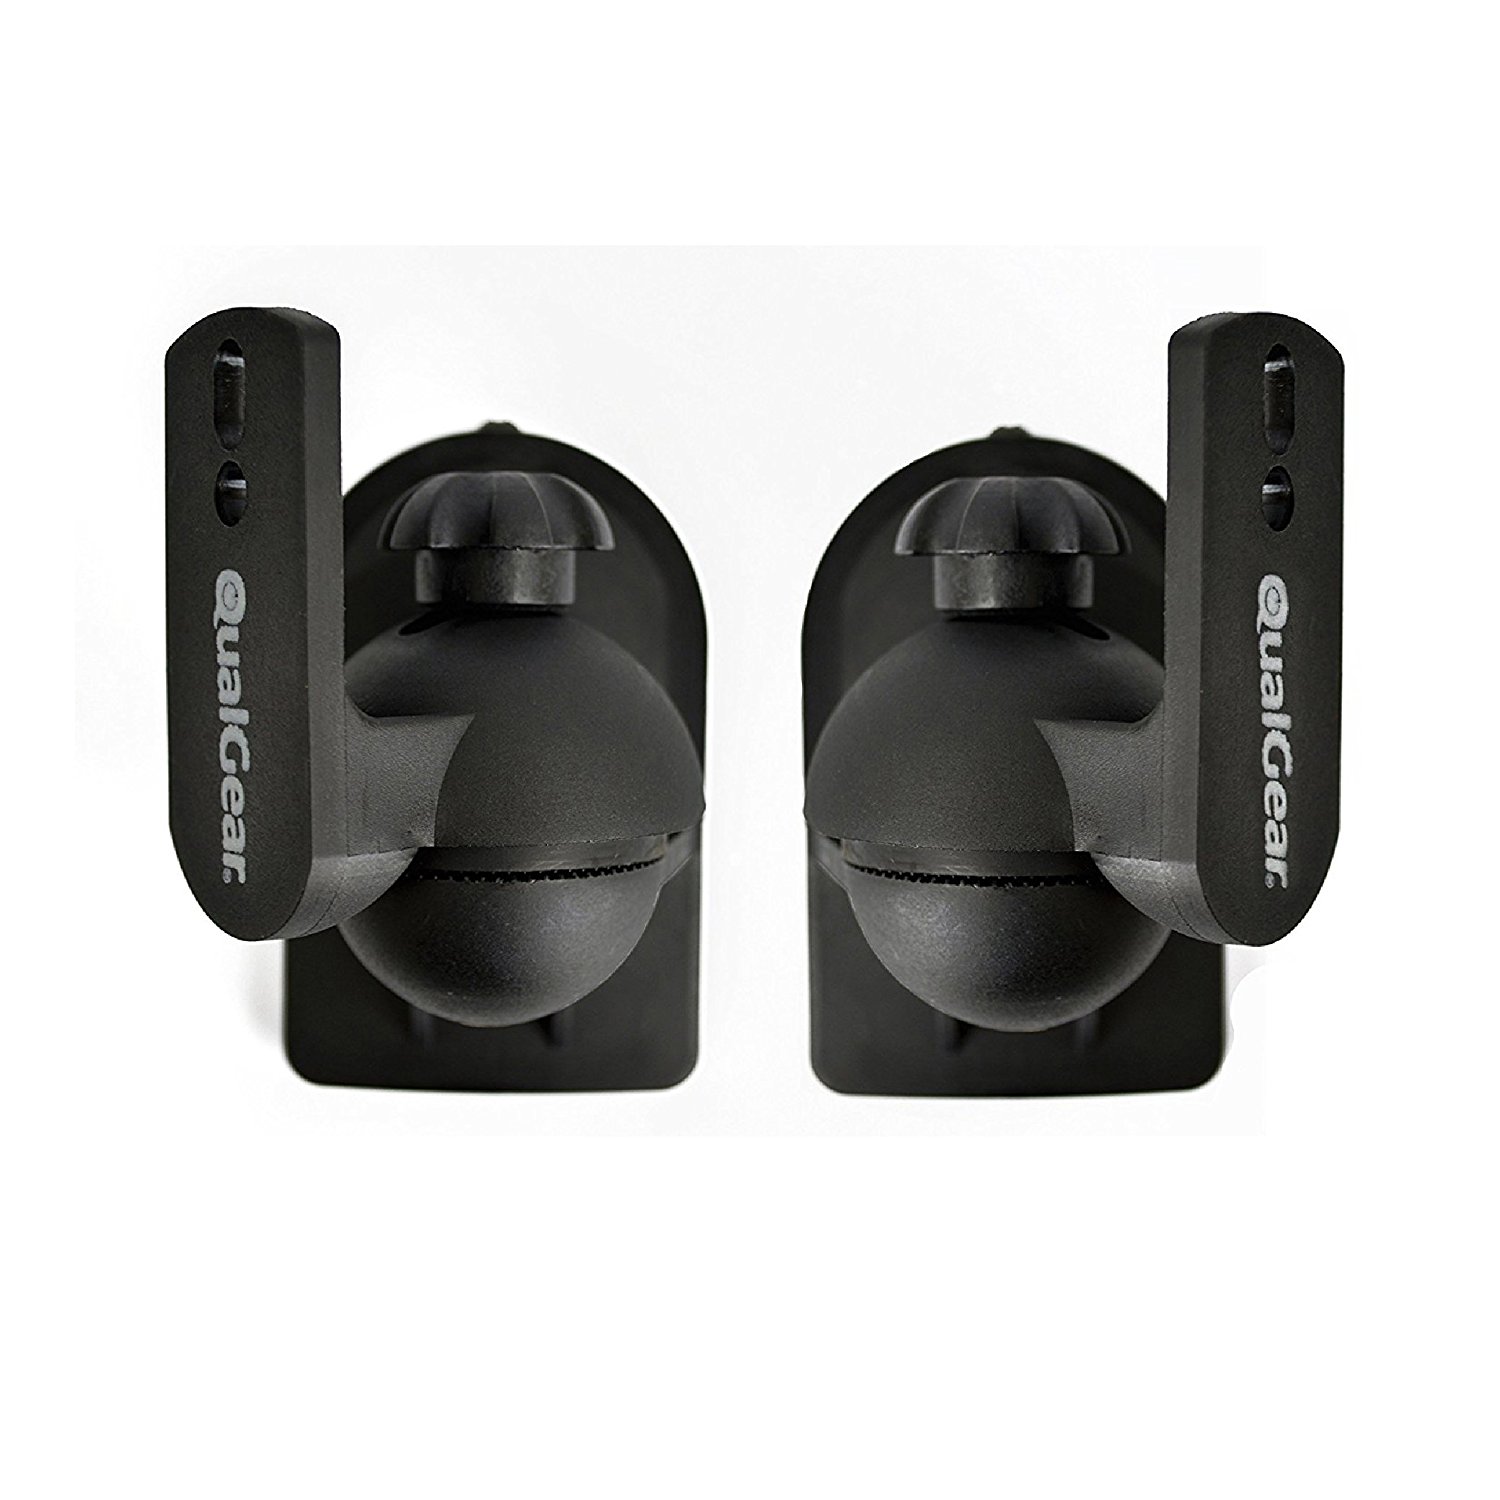 QualGear QG-SB-002-BLK UL Listed Universal Speaker Wall Mount for Most Speakers up to 3.5kg/7.7lbs, Black